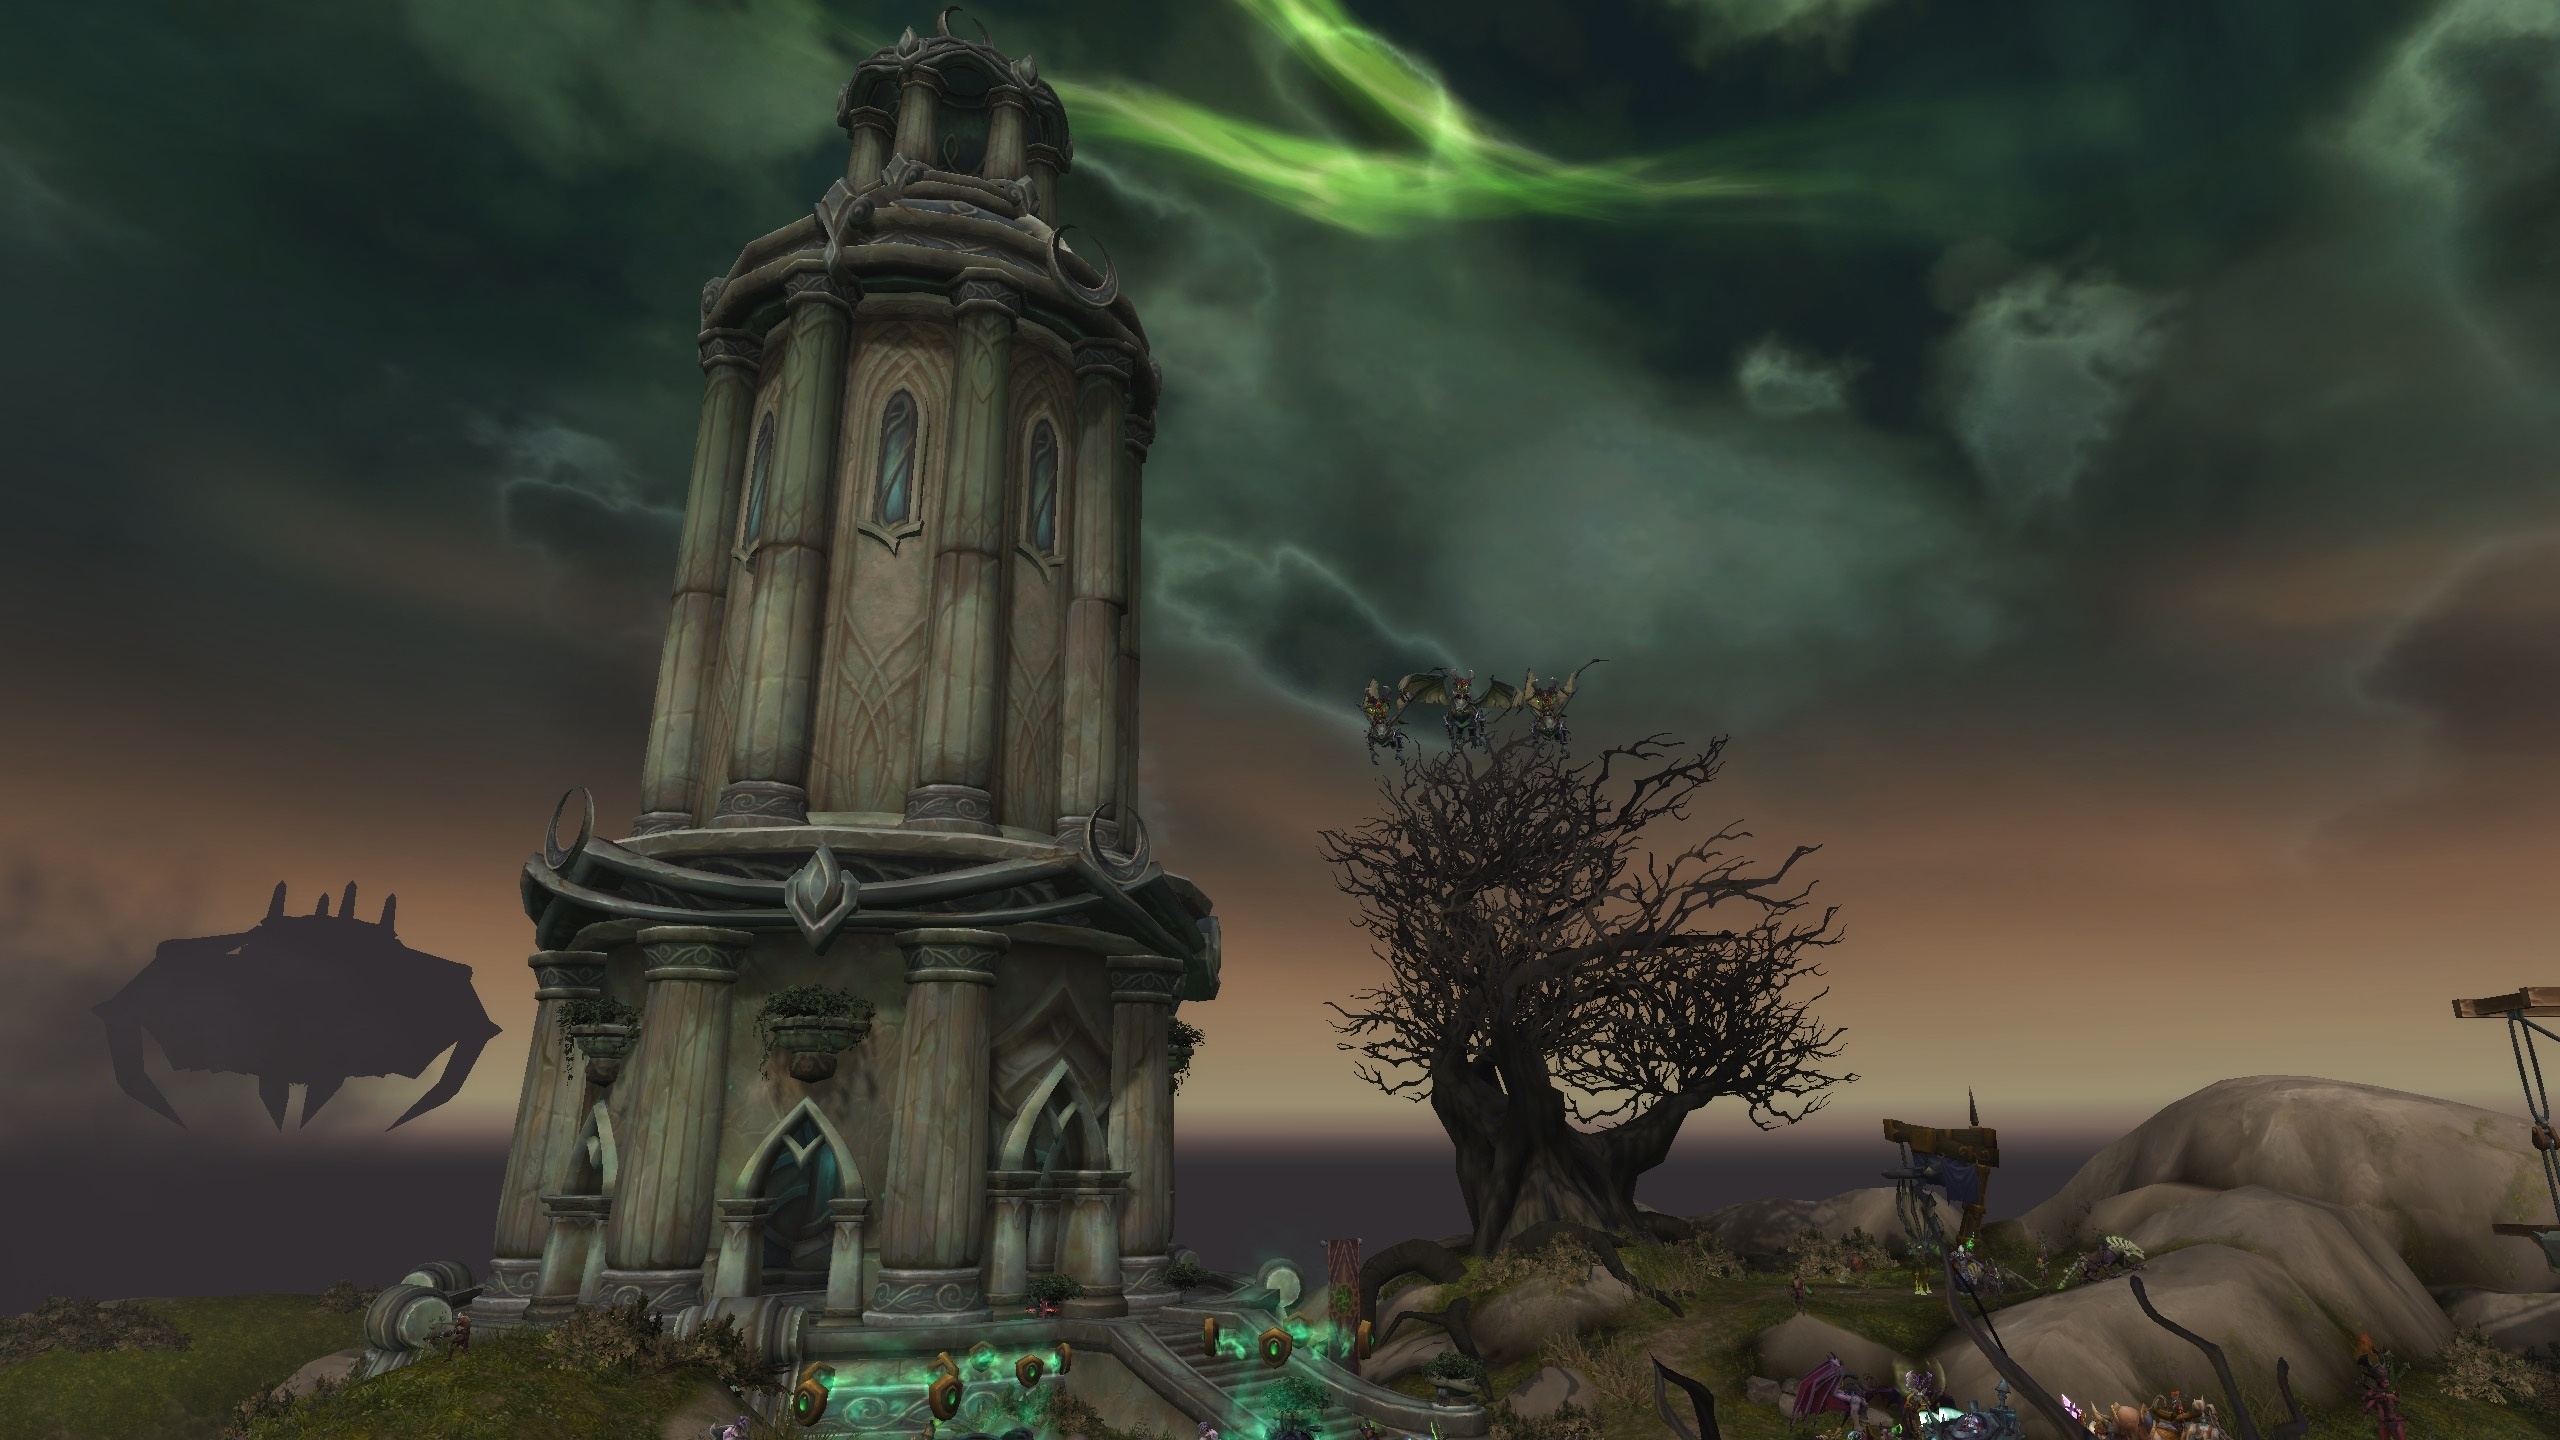 World of Warcraft: Mage Tower is active until Battle For Azeroth's pre-patch